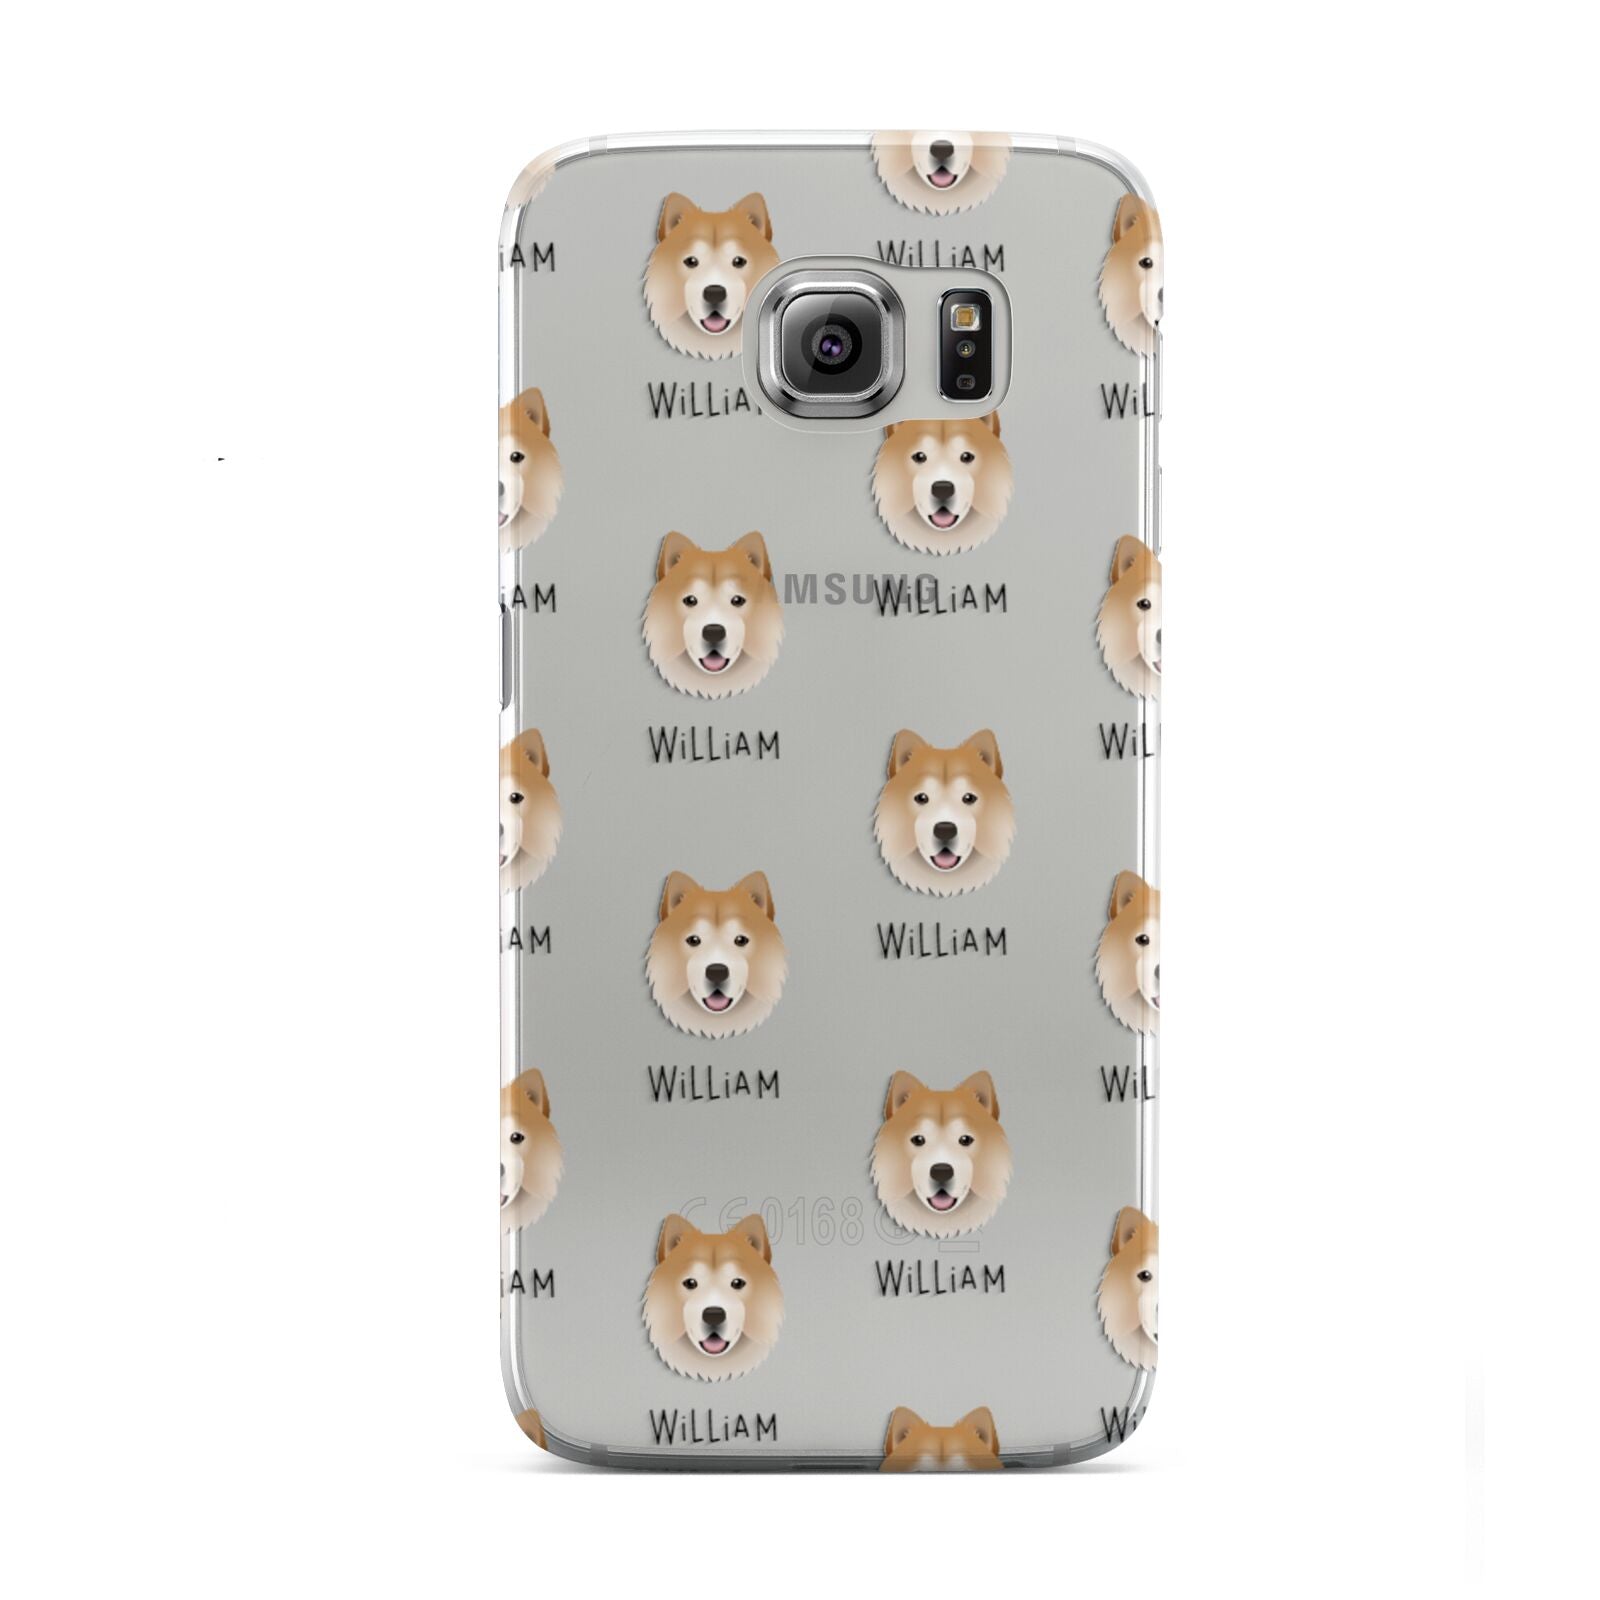 Chusky Icon with Name Samsung Galaxy S6 Case